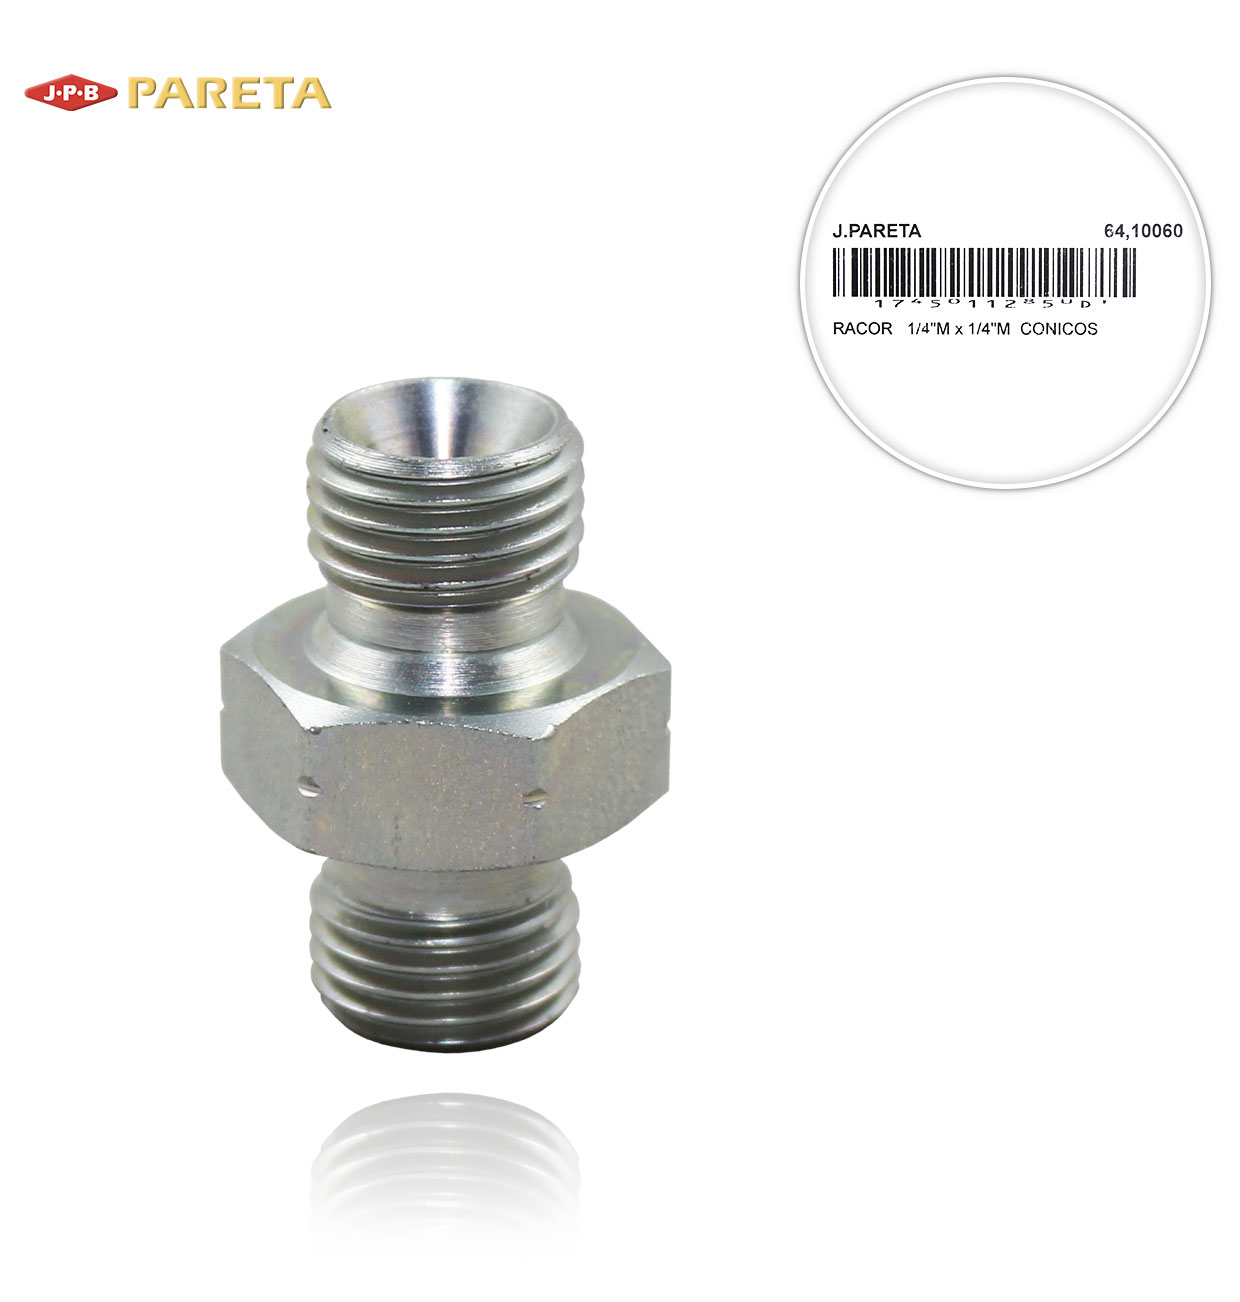 CONICAL CONNECTOR   1/4"M x 1/4"M